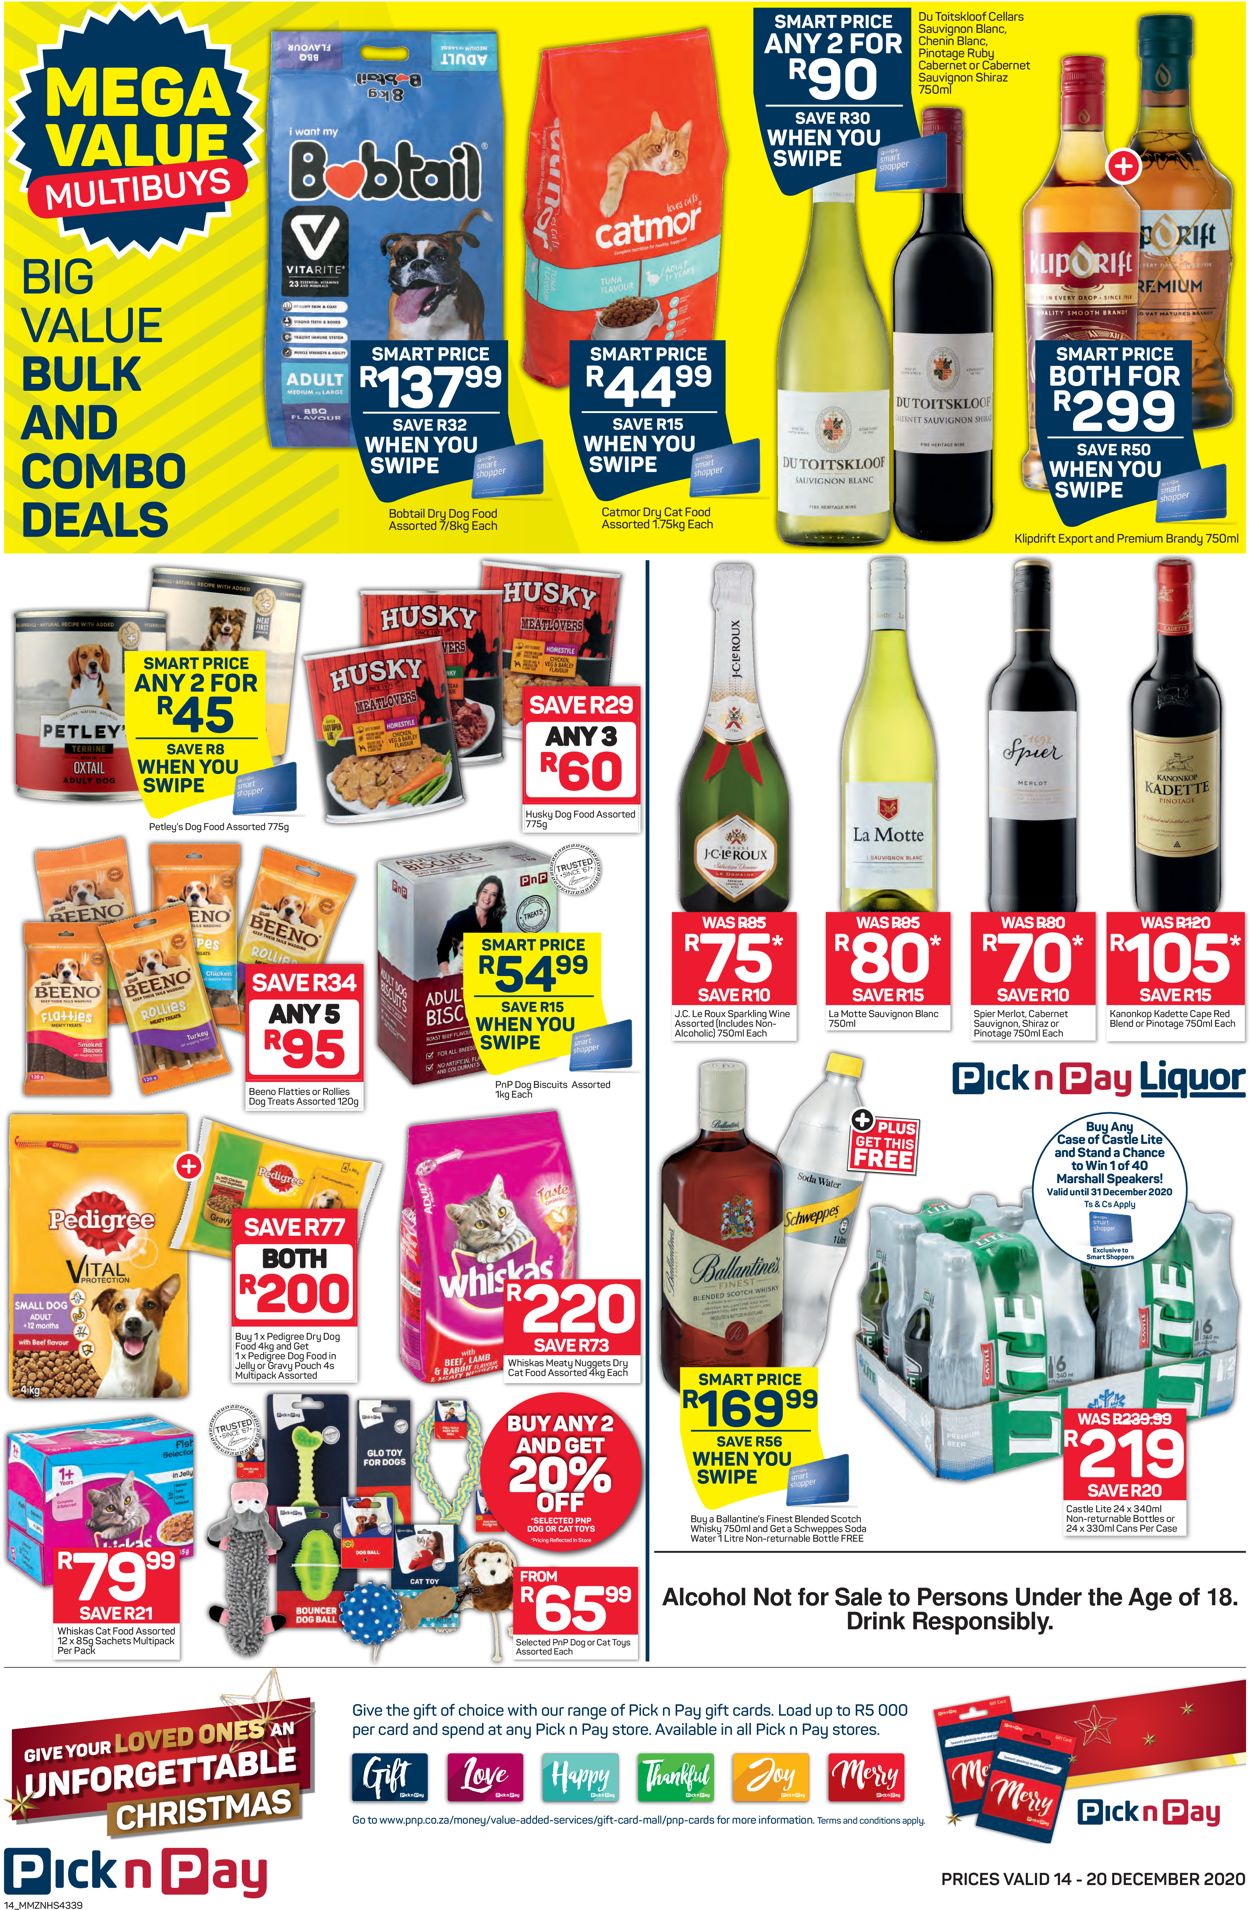 Pick n Pay Countdown 2020 Catalogue - 2020/12/14-2020/12/20 (Page 14)